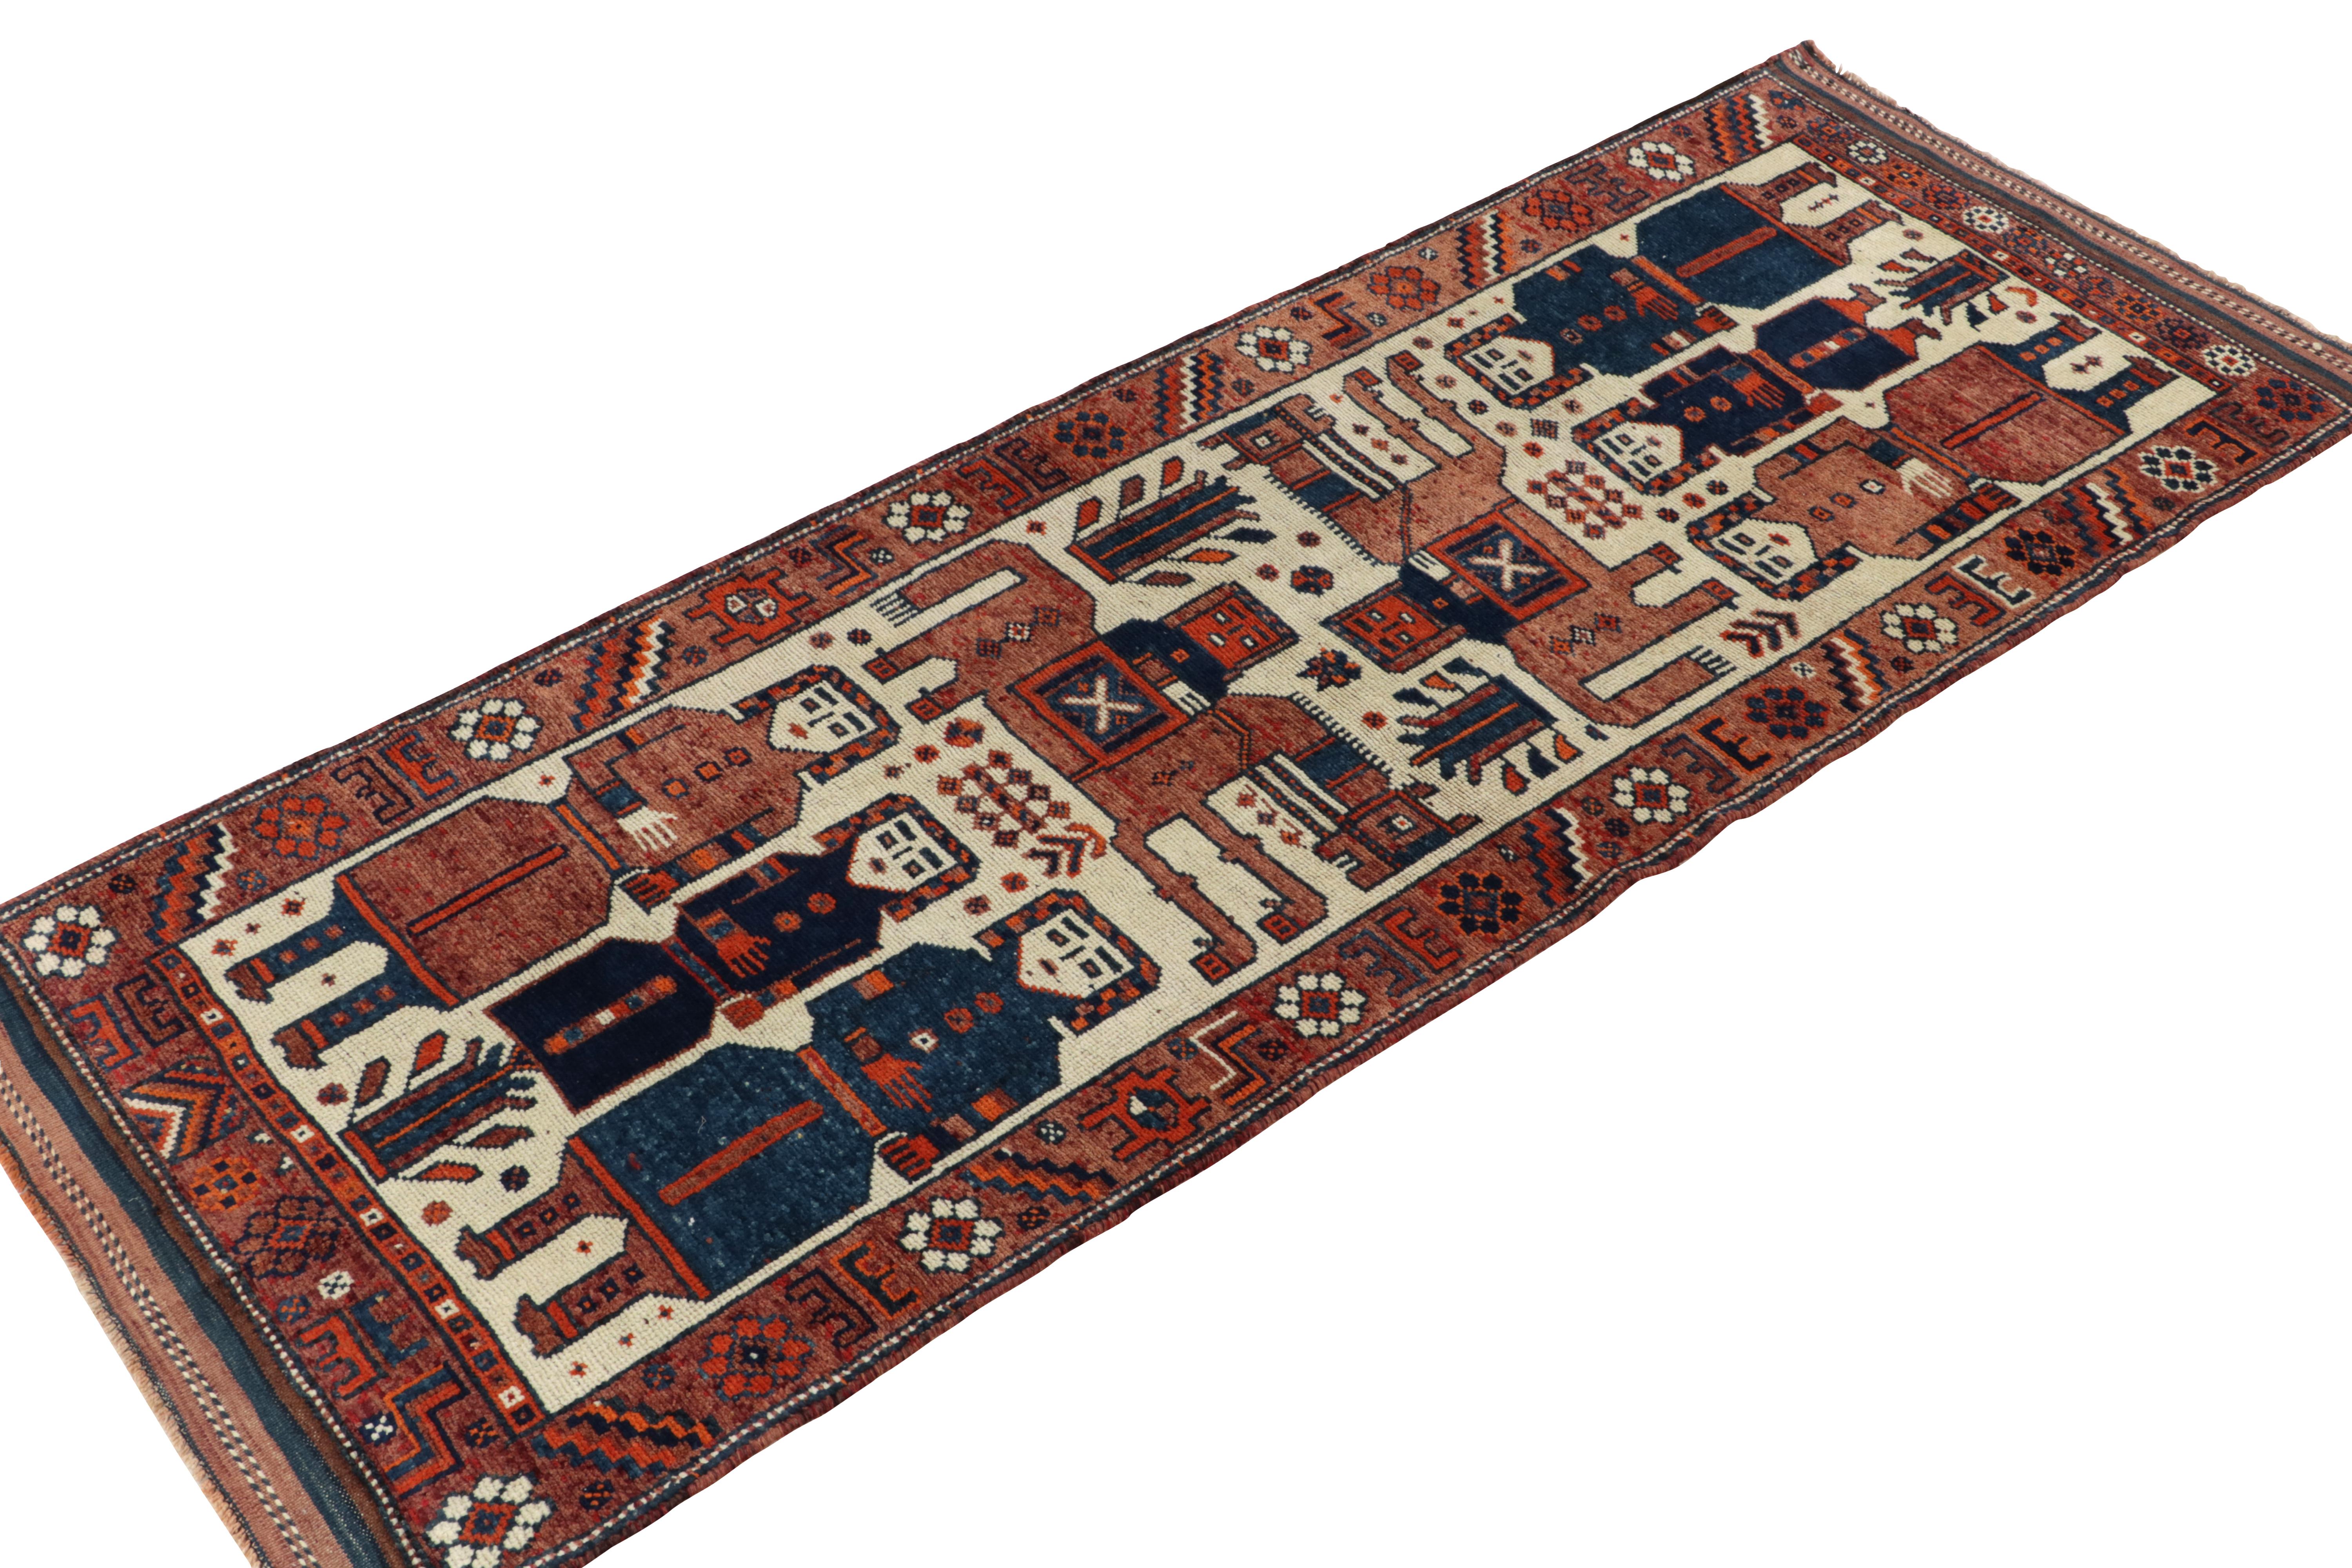 Hand-knotted in wool, a 4x11 rug from Rug & Kilim’s newly unveiled curation of rare tribal acquisitions. Originating from Turkey circa 1950-1960, as collectible in its pictorial figures as it is decorative in size.

The design enjoys human &